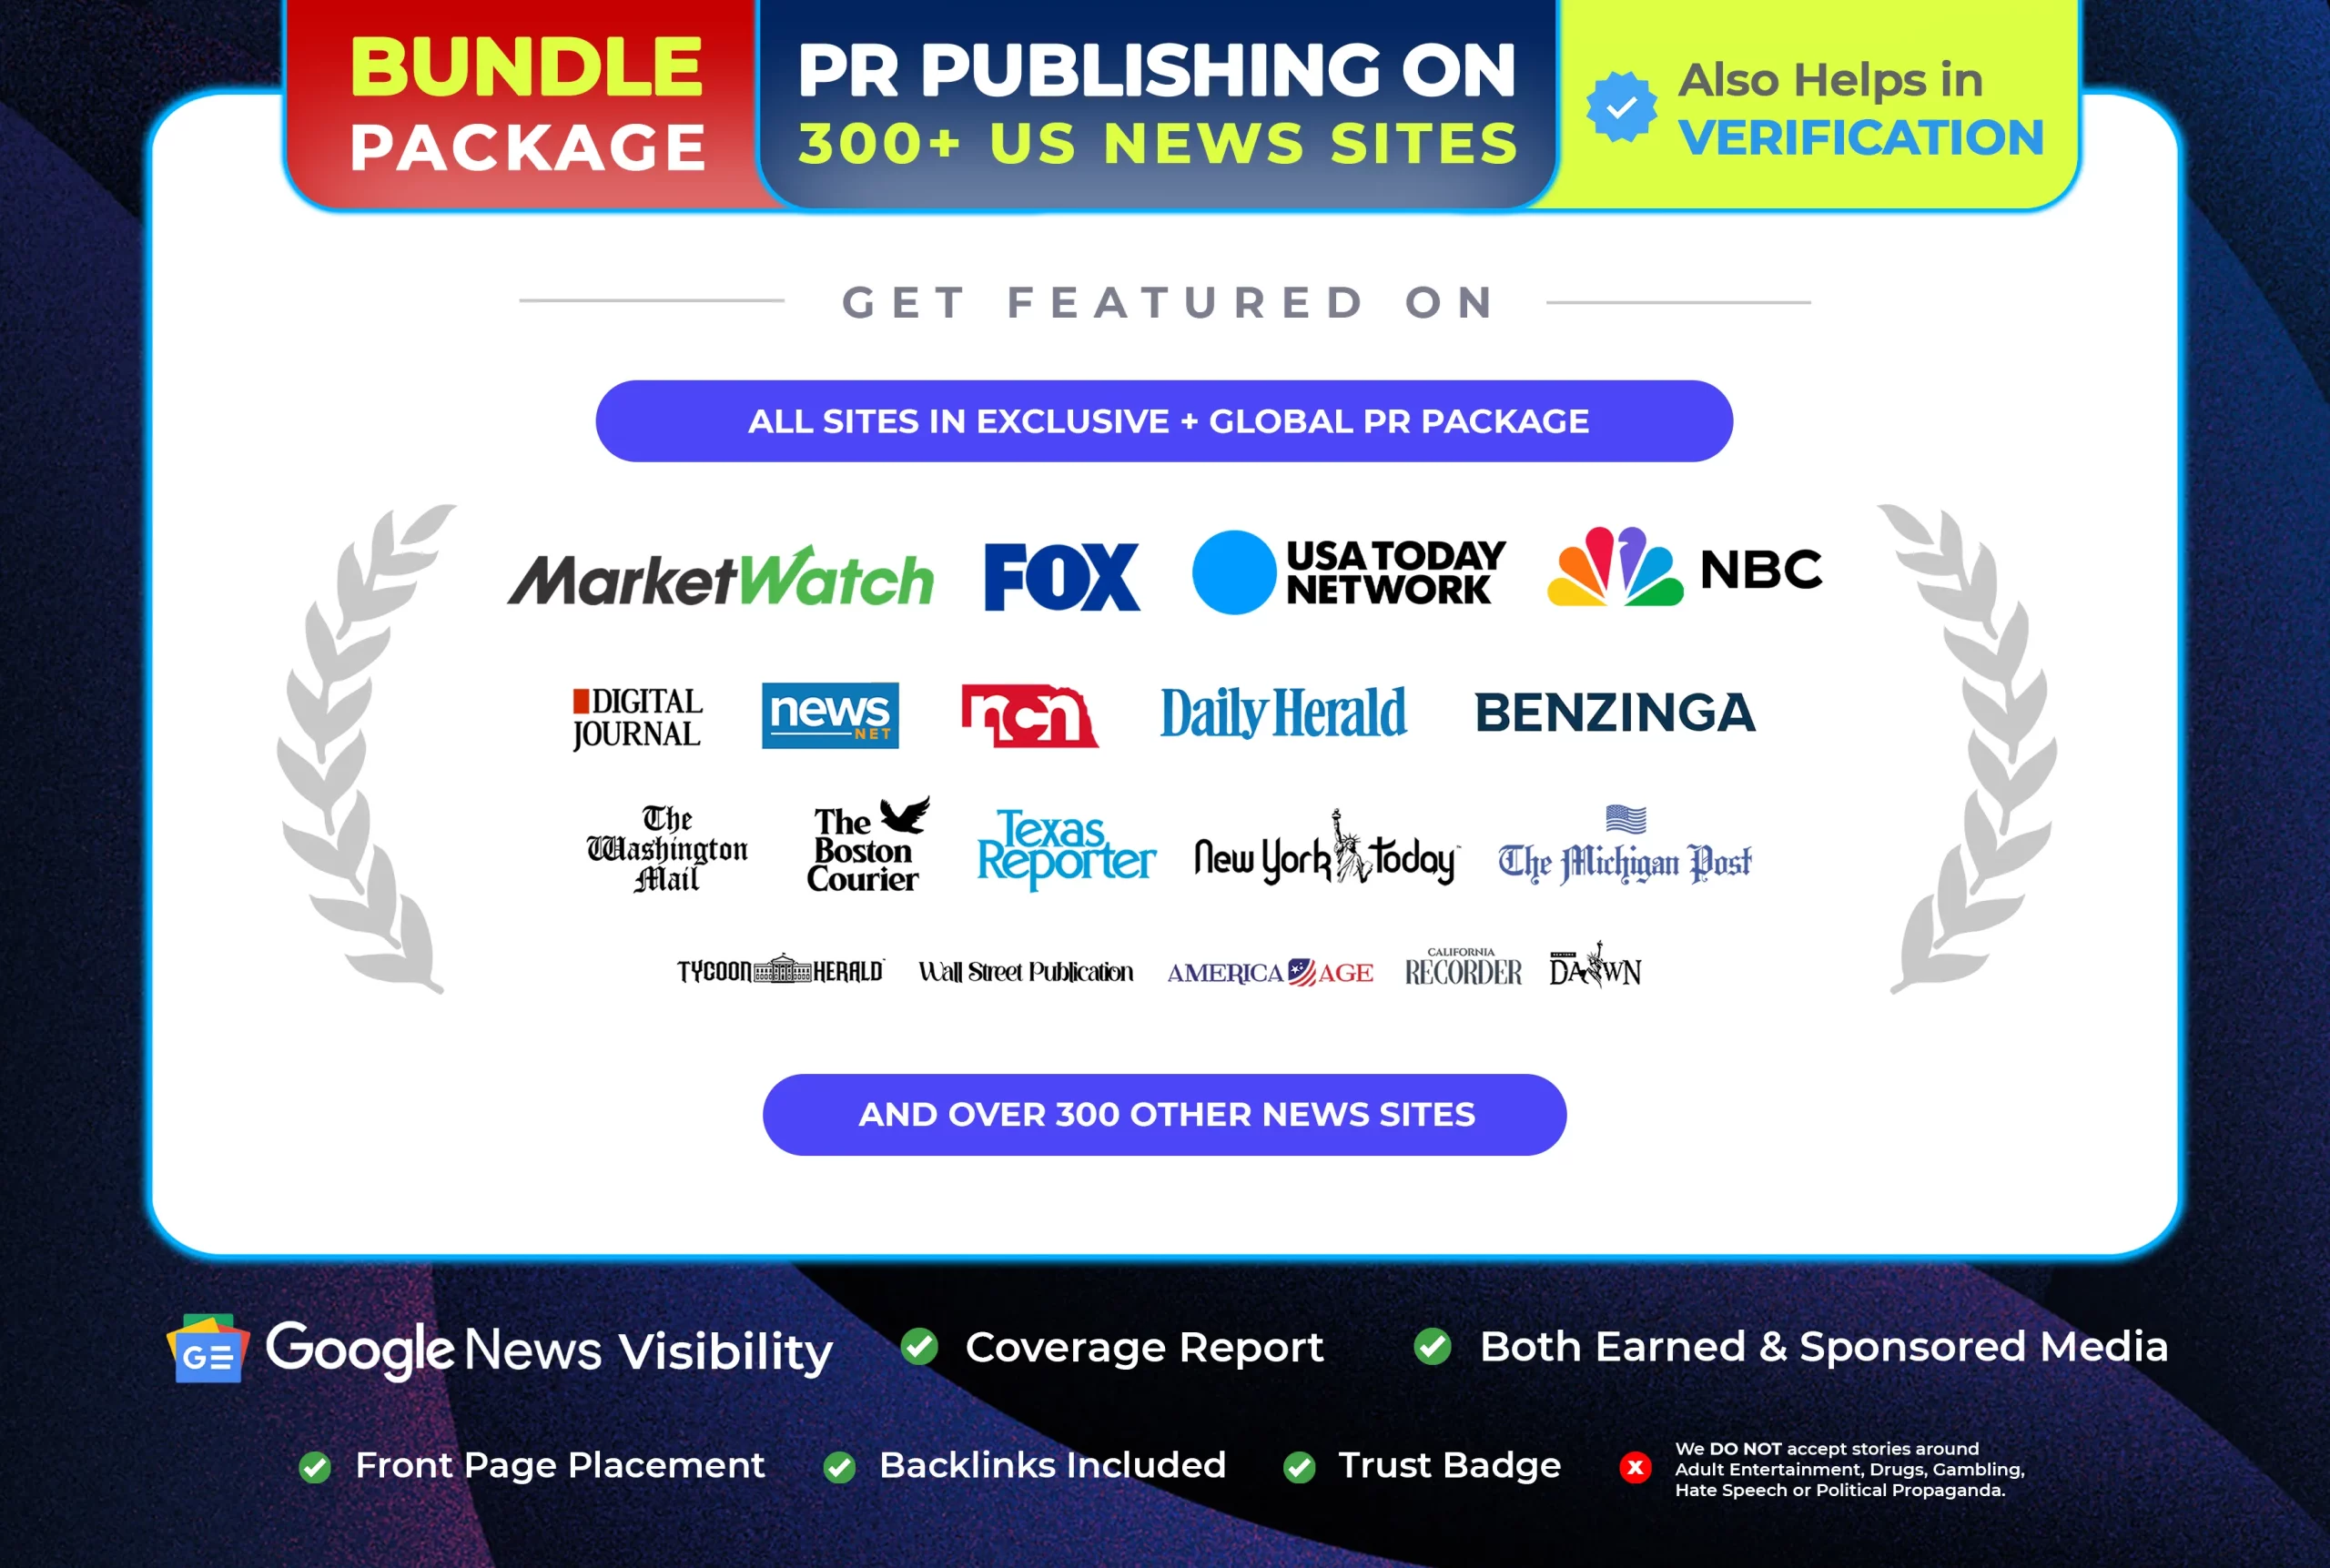 Bundle: Everything in Exclusive + Global Package (Get Featured on 300+ News Sites)